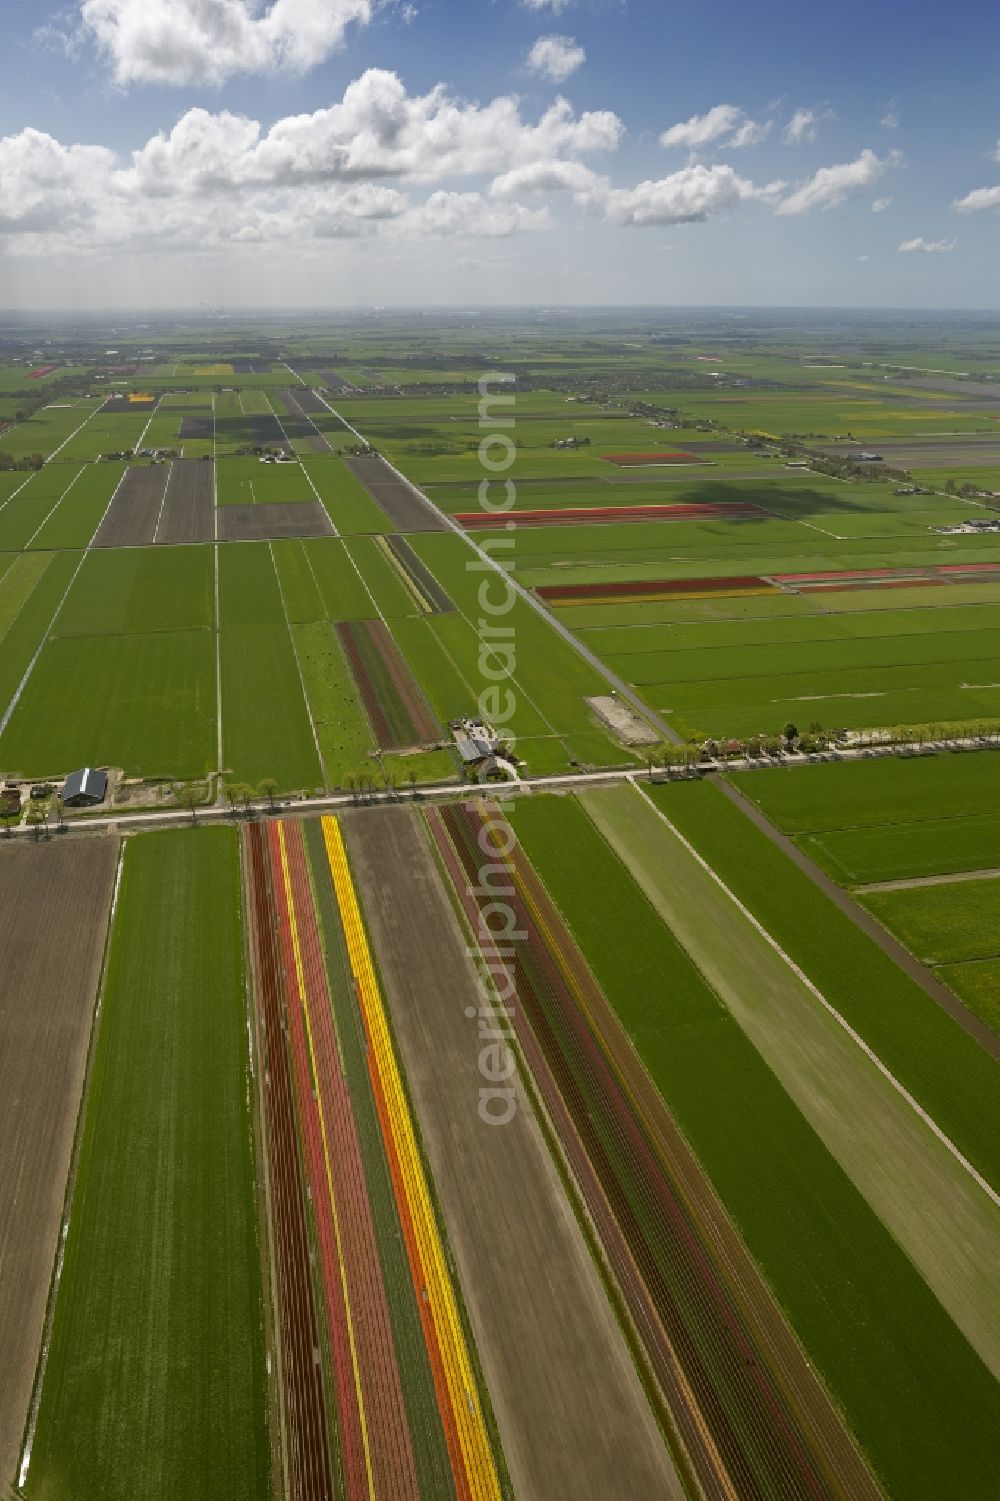 Noordbeemster from the bird's eye view: Agriculture - Landscape with fields of tulips to flower production in Noordbeemster in North Holland Holland / Netherlands